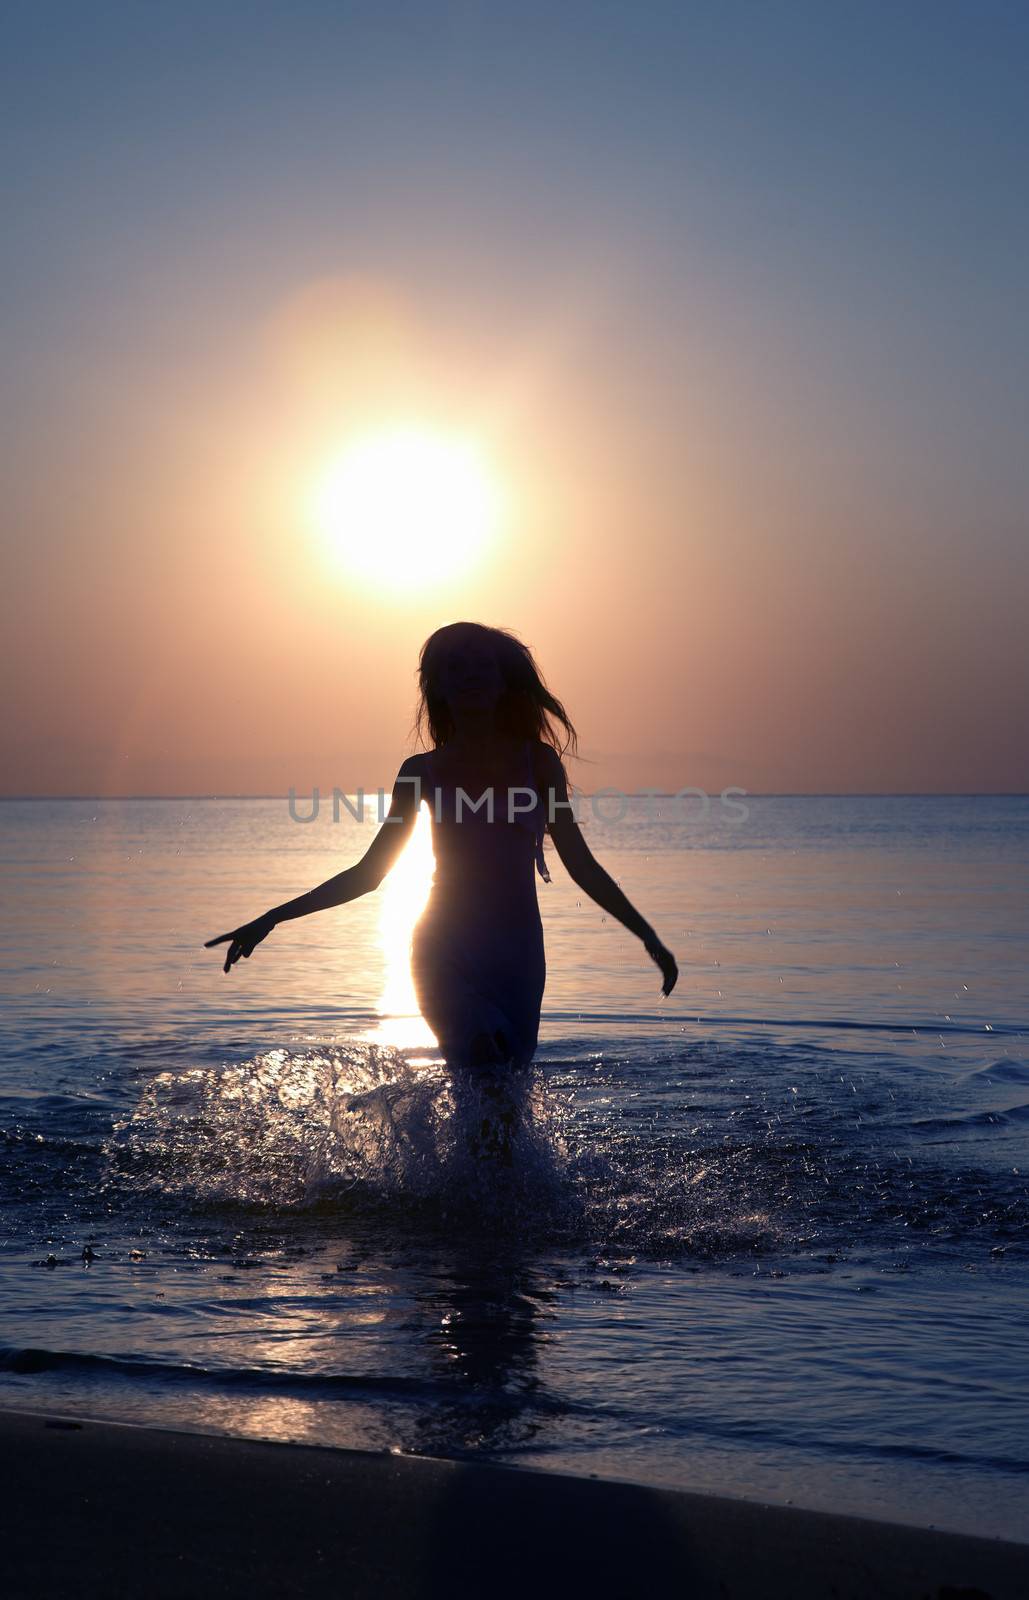 Silhouette of the woman running in the water during sunset. Natural light and colors